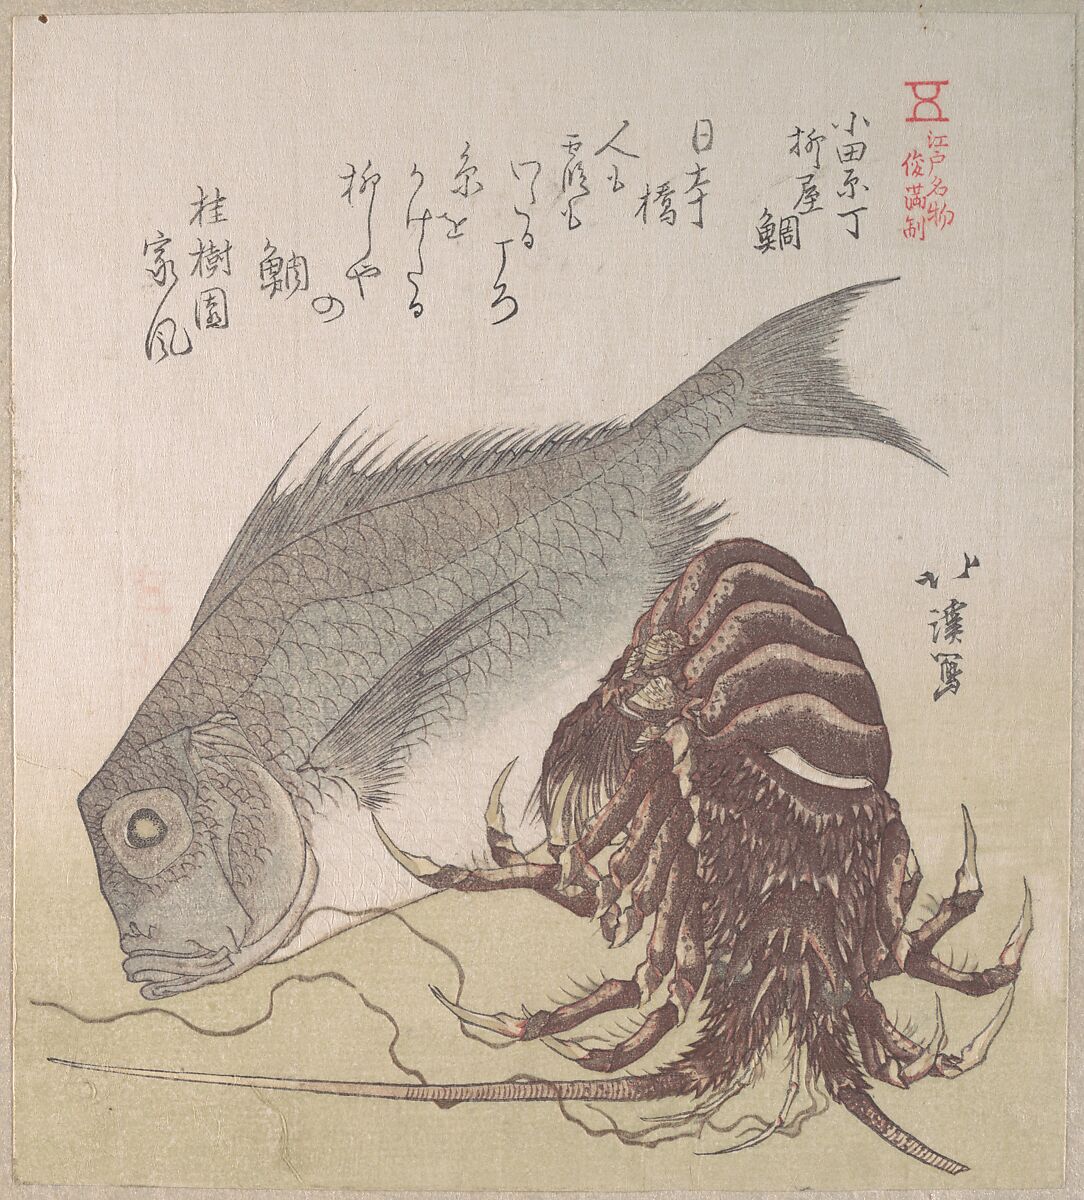 Tai Fish and Lobster; Specialities of Yanagiya in Odawara-cho, Totoya Hokkei (Japanese, 1780–1850), Part of an album of woodblock prints (surimono); ink and color on paper, Japan 